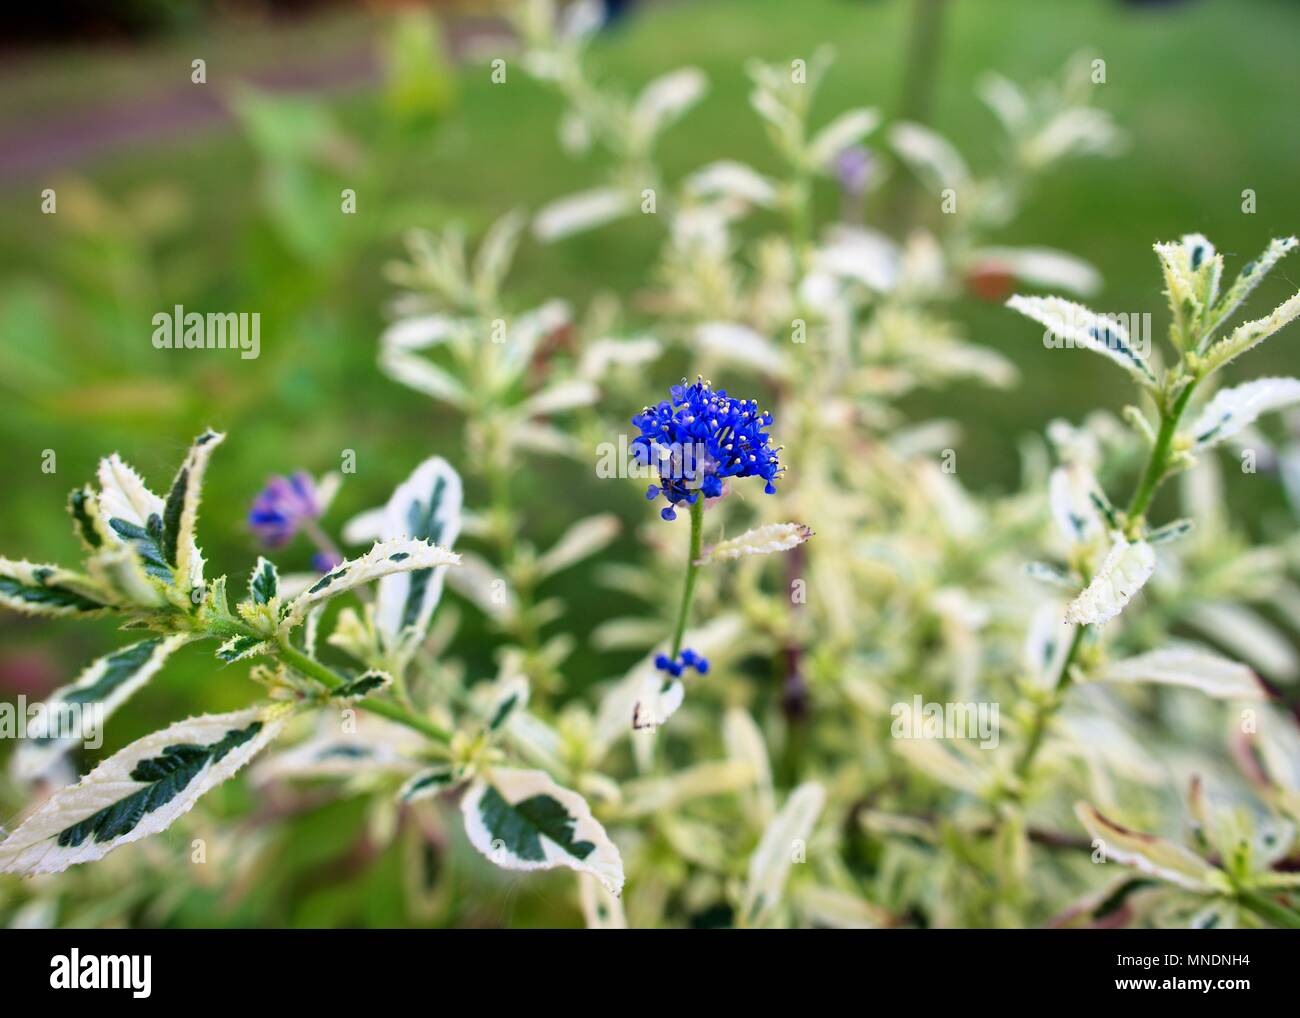 Vivid, blue Ceanothus (California Lilac) flower growing on a sunny spring day. Stock Photo